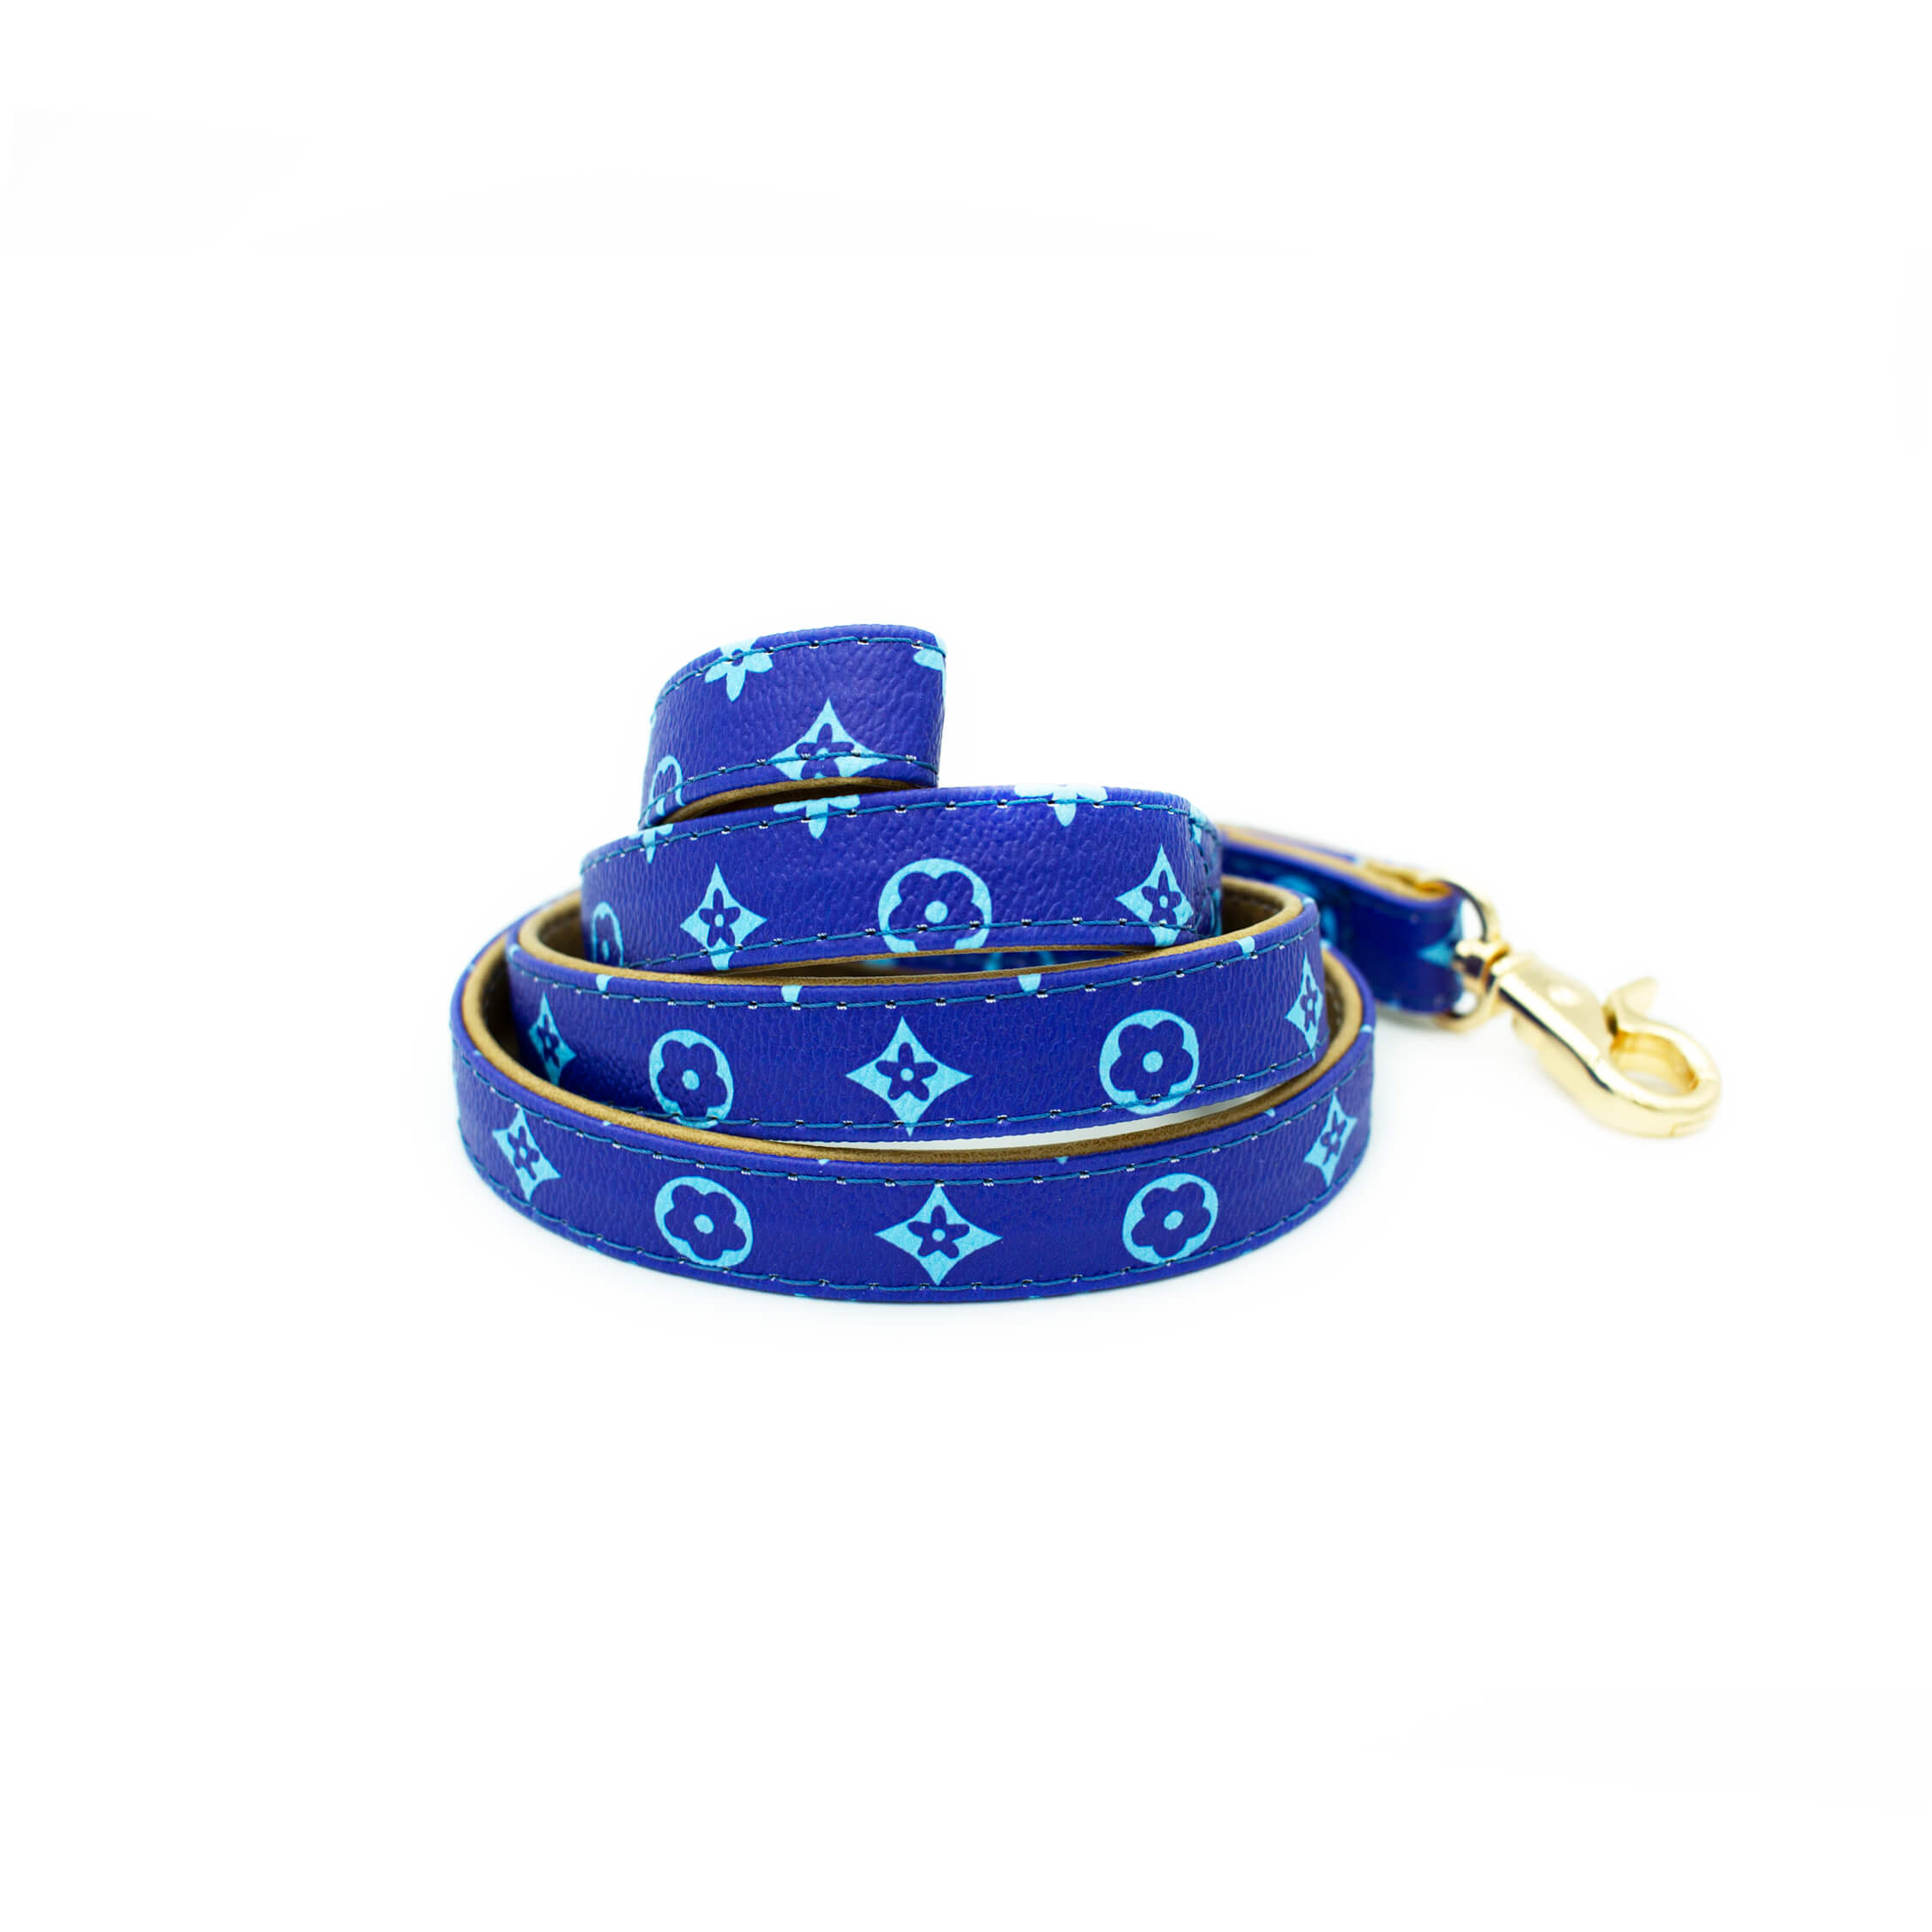 Full LV dog harness available in all sizes and designer.